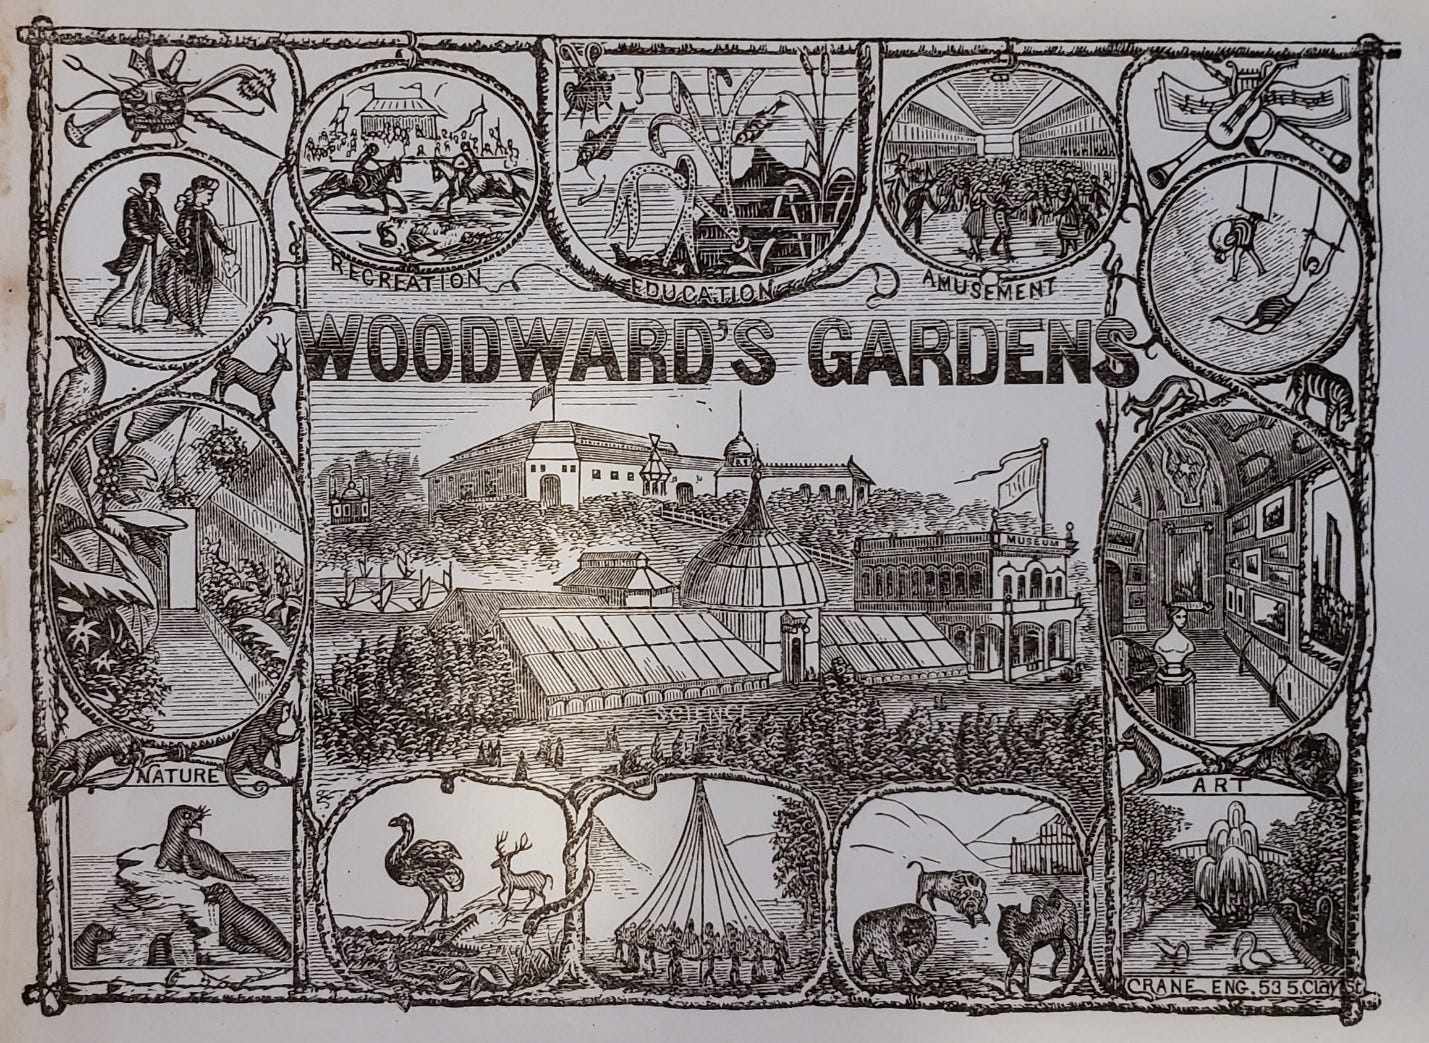 Woodward's Gardens: A Trip into the Past – Sutro Library